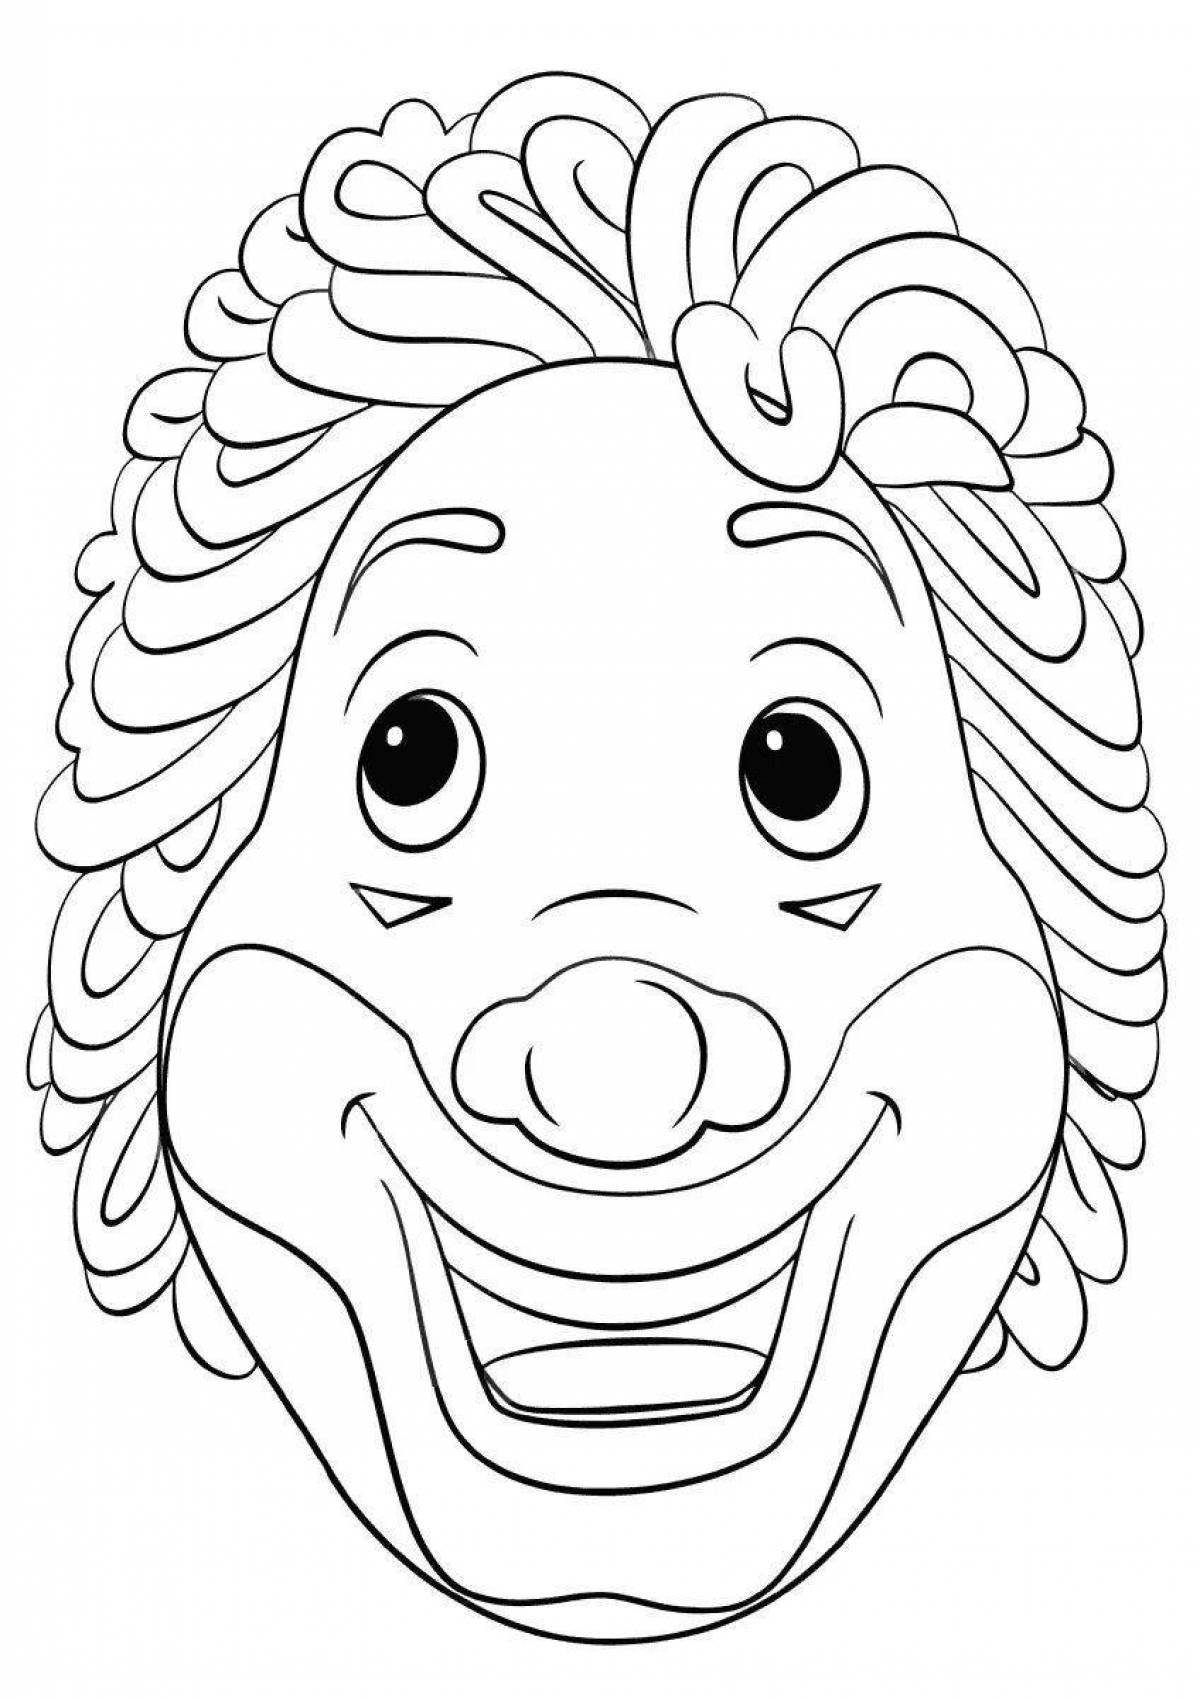 Fun clown face coloring page